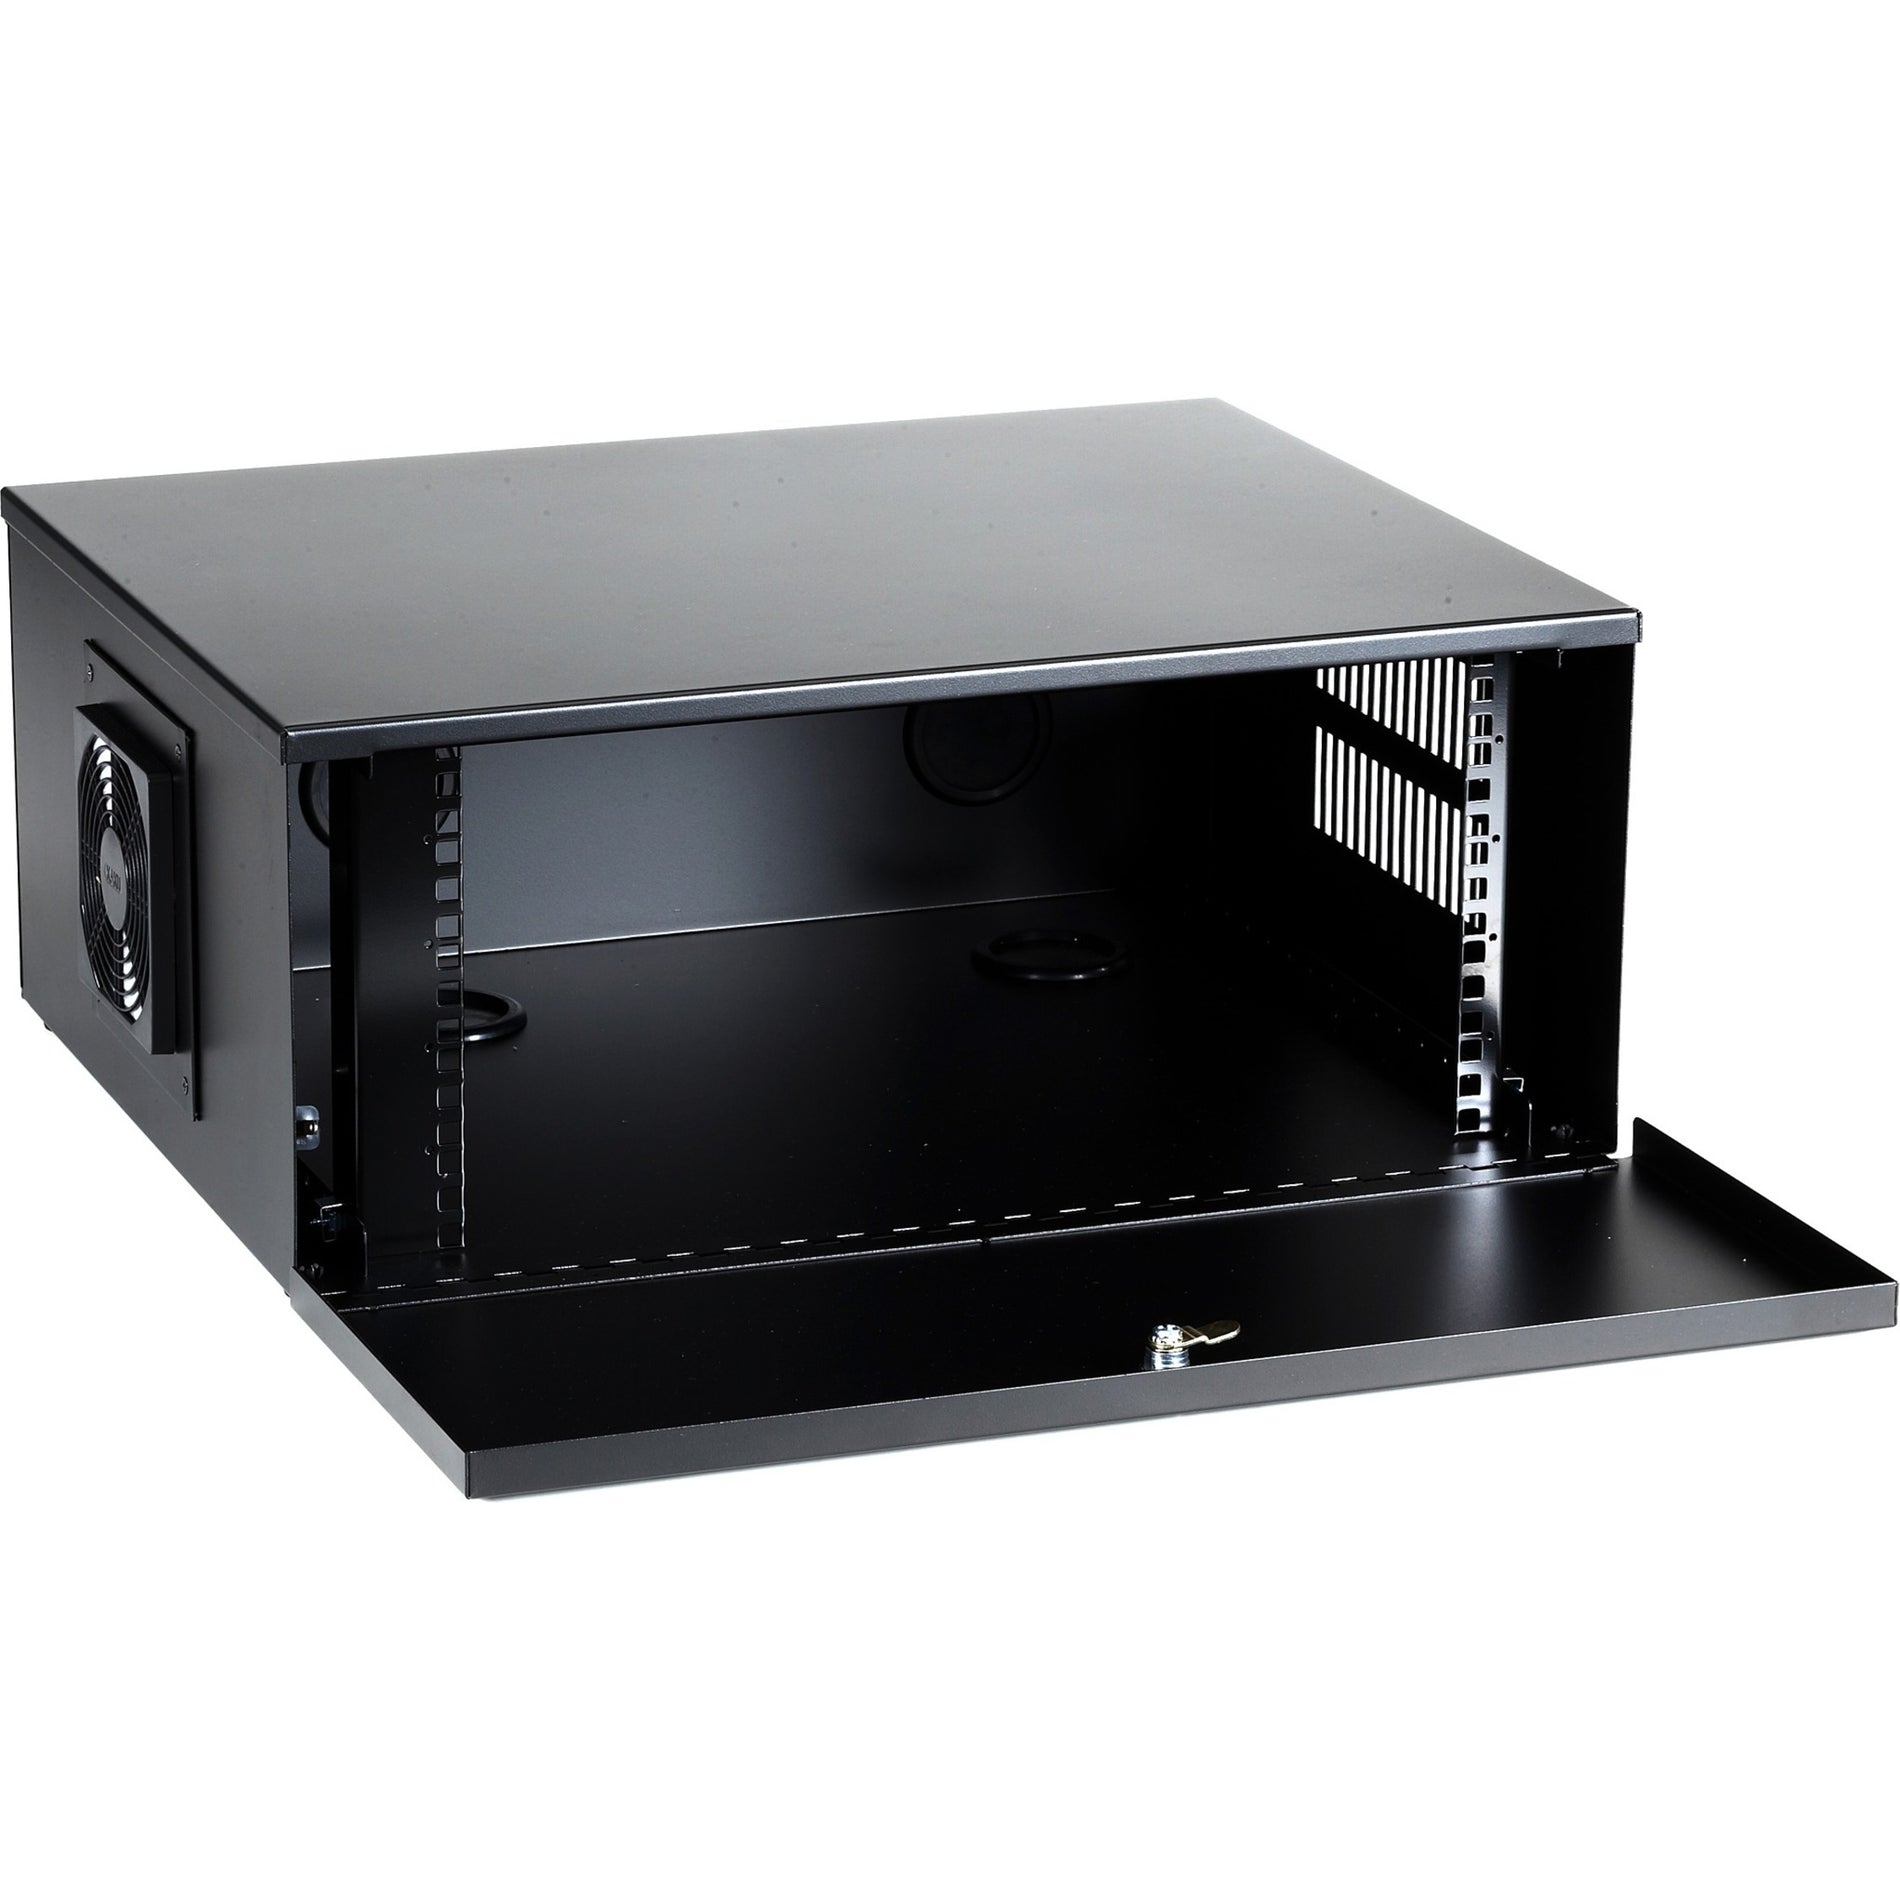 Black Box LCKBOX4U DVR Lock Box with Fan Unit, TAA Compliant - Secure Your DVR with Cable Management